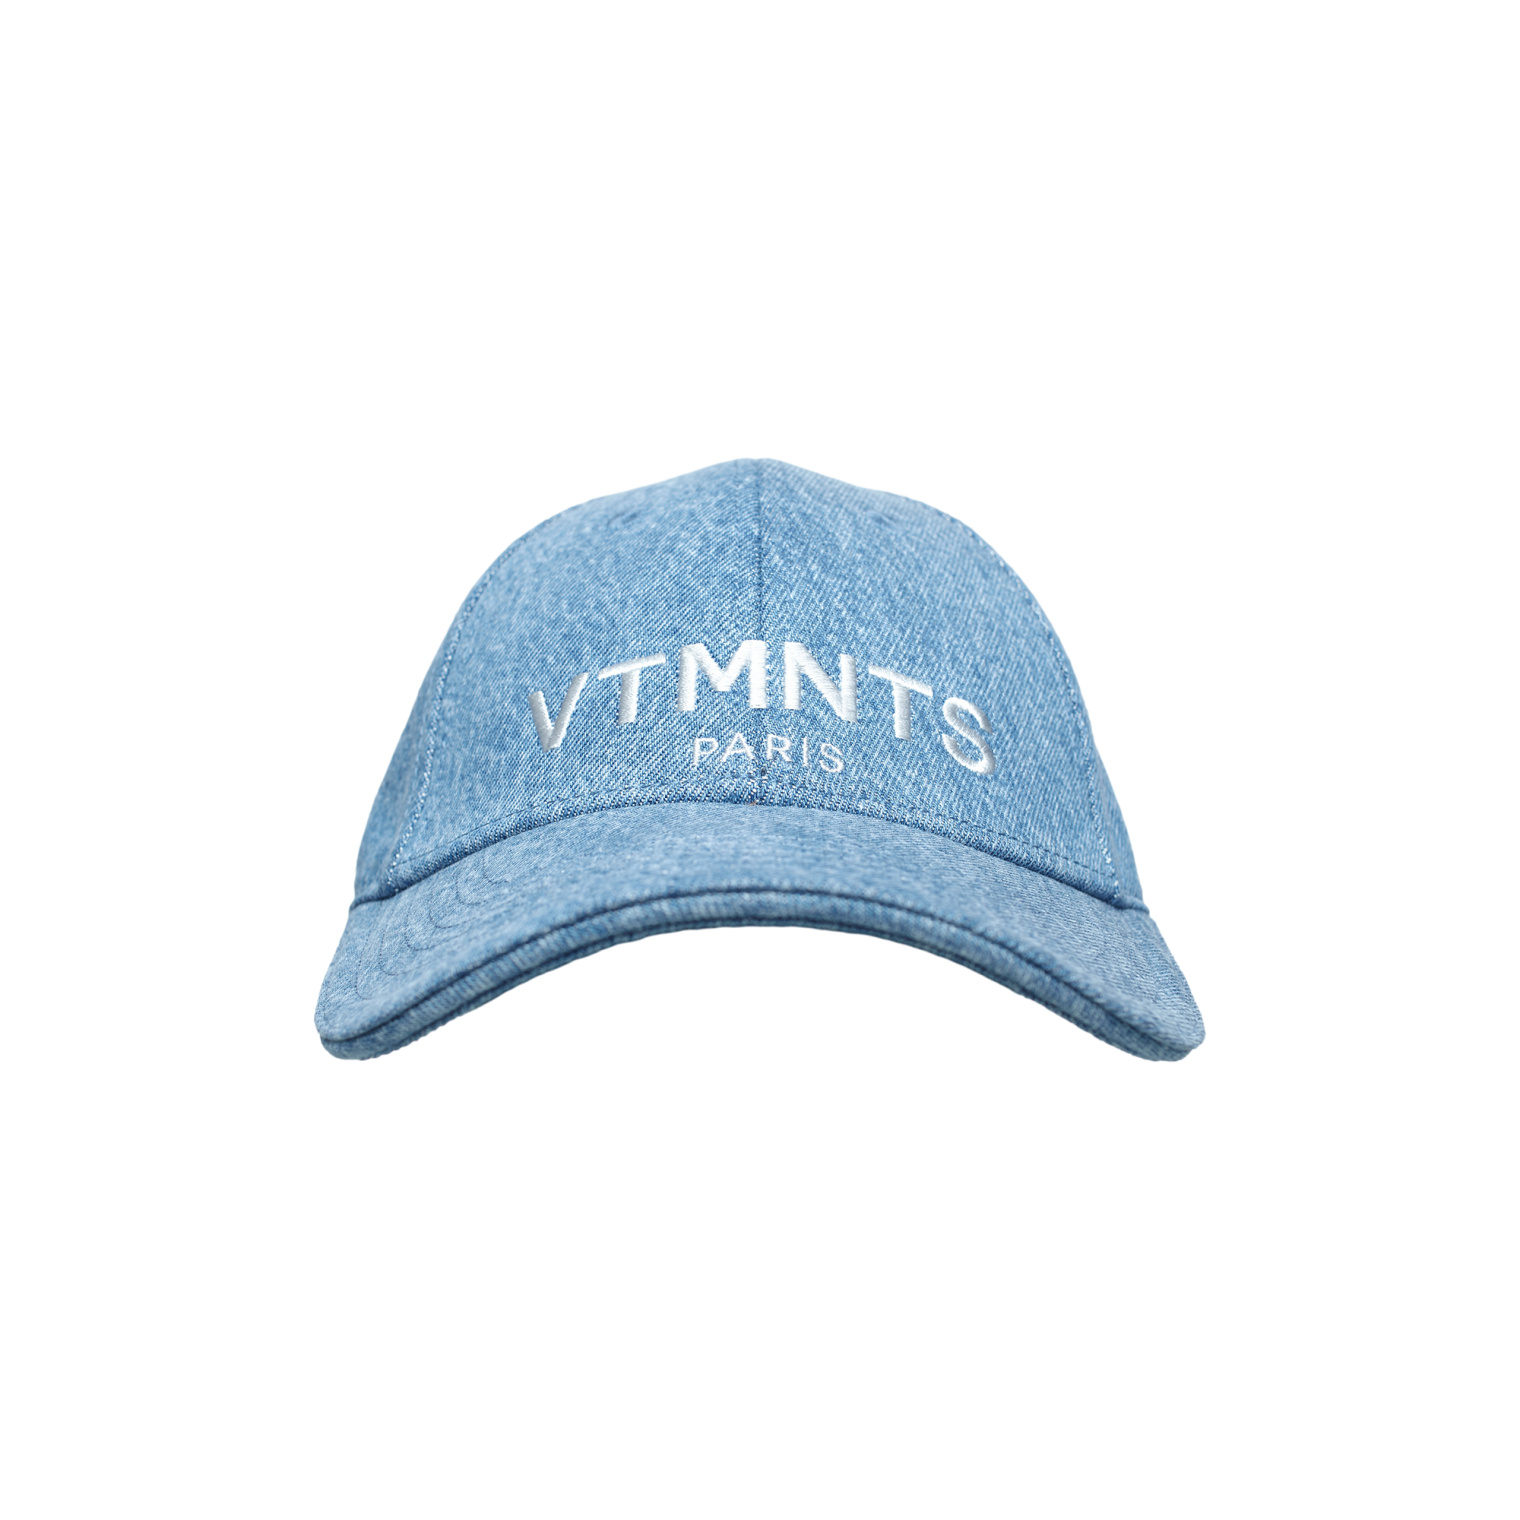 VTMNTS Logo embroidered cap